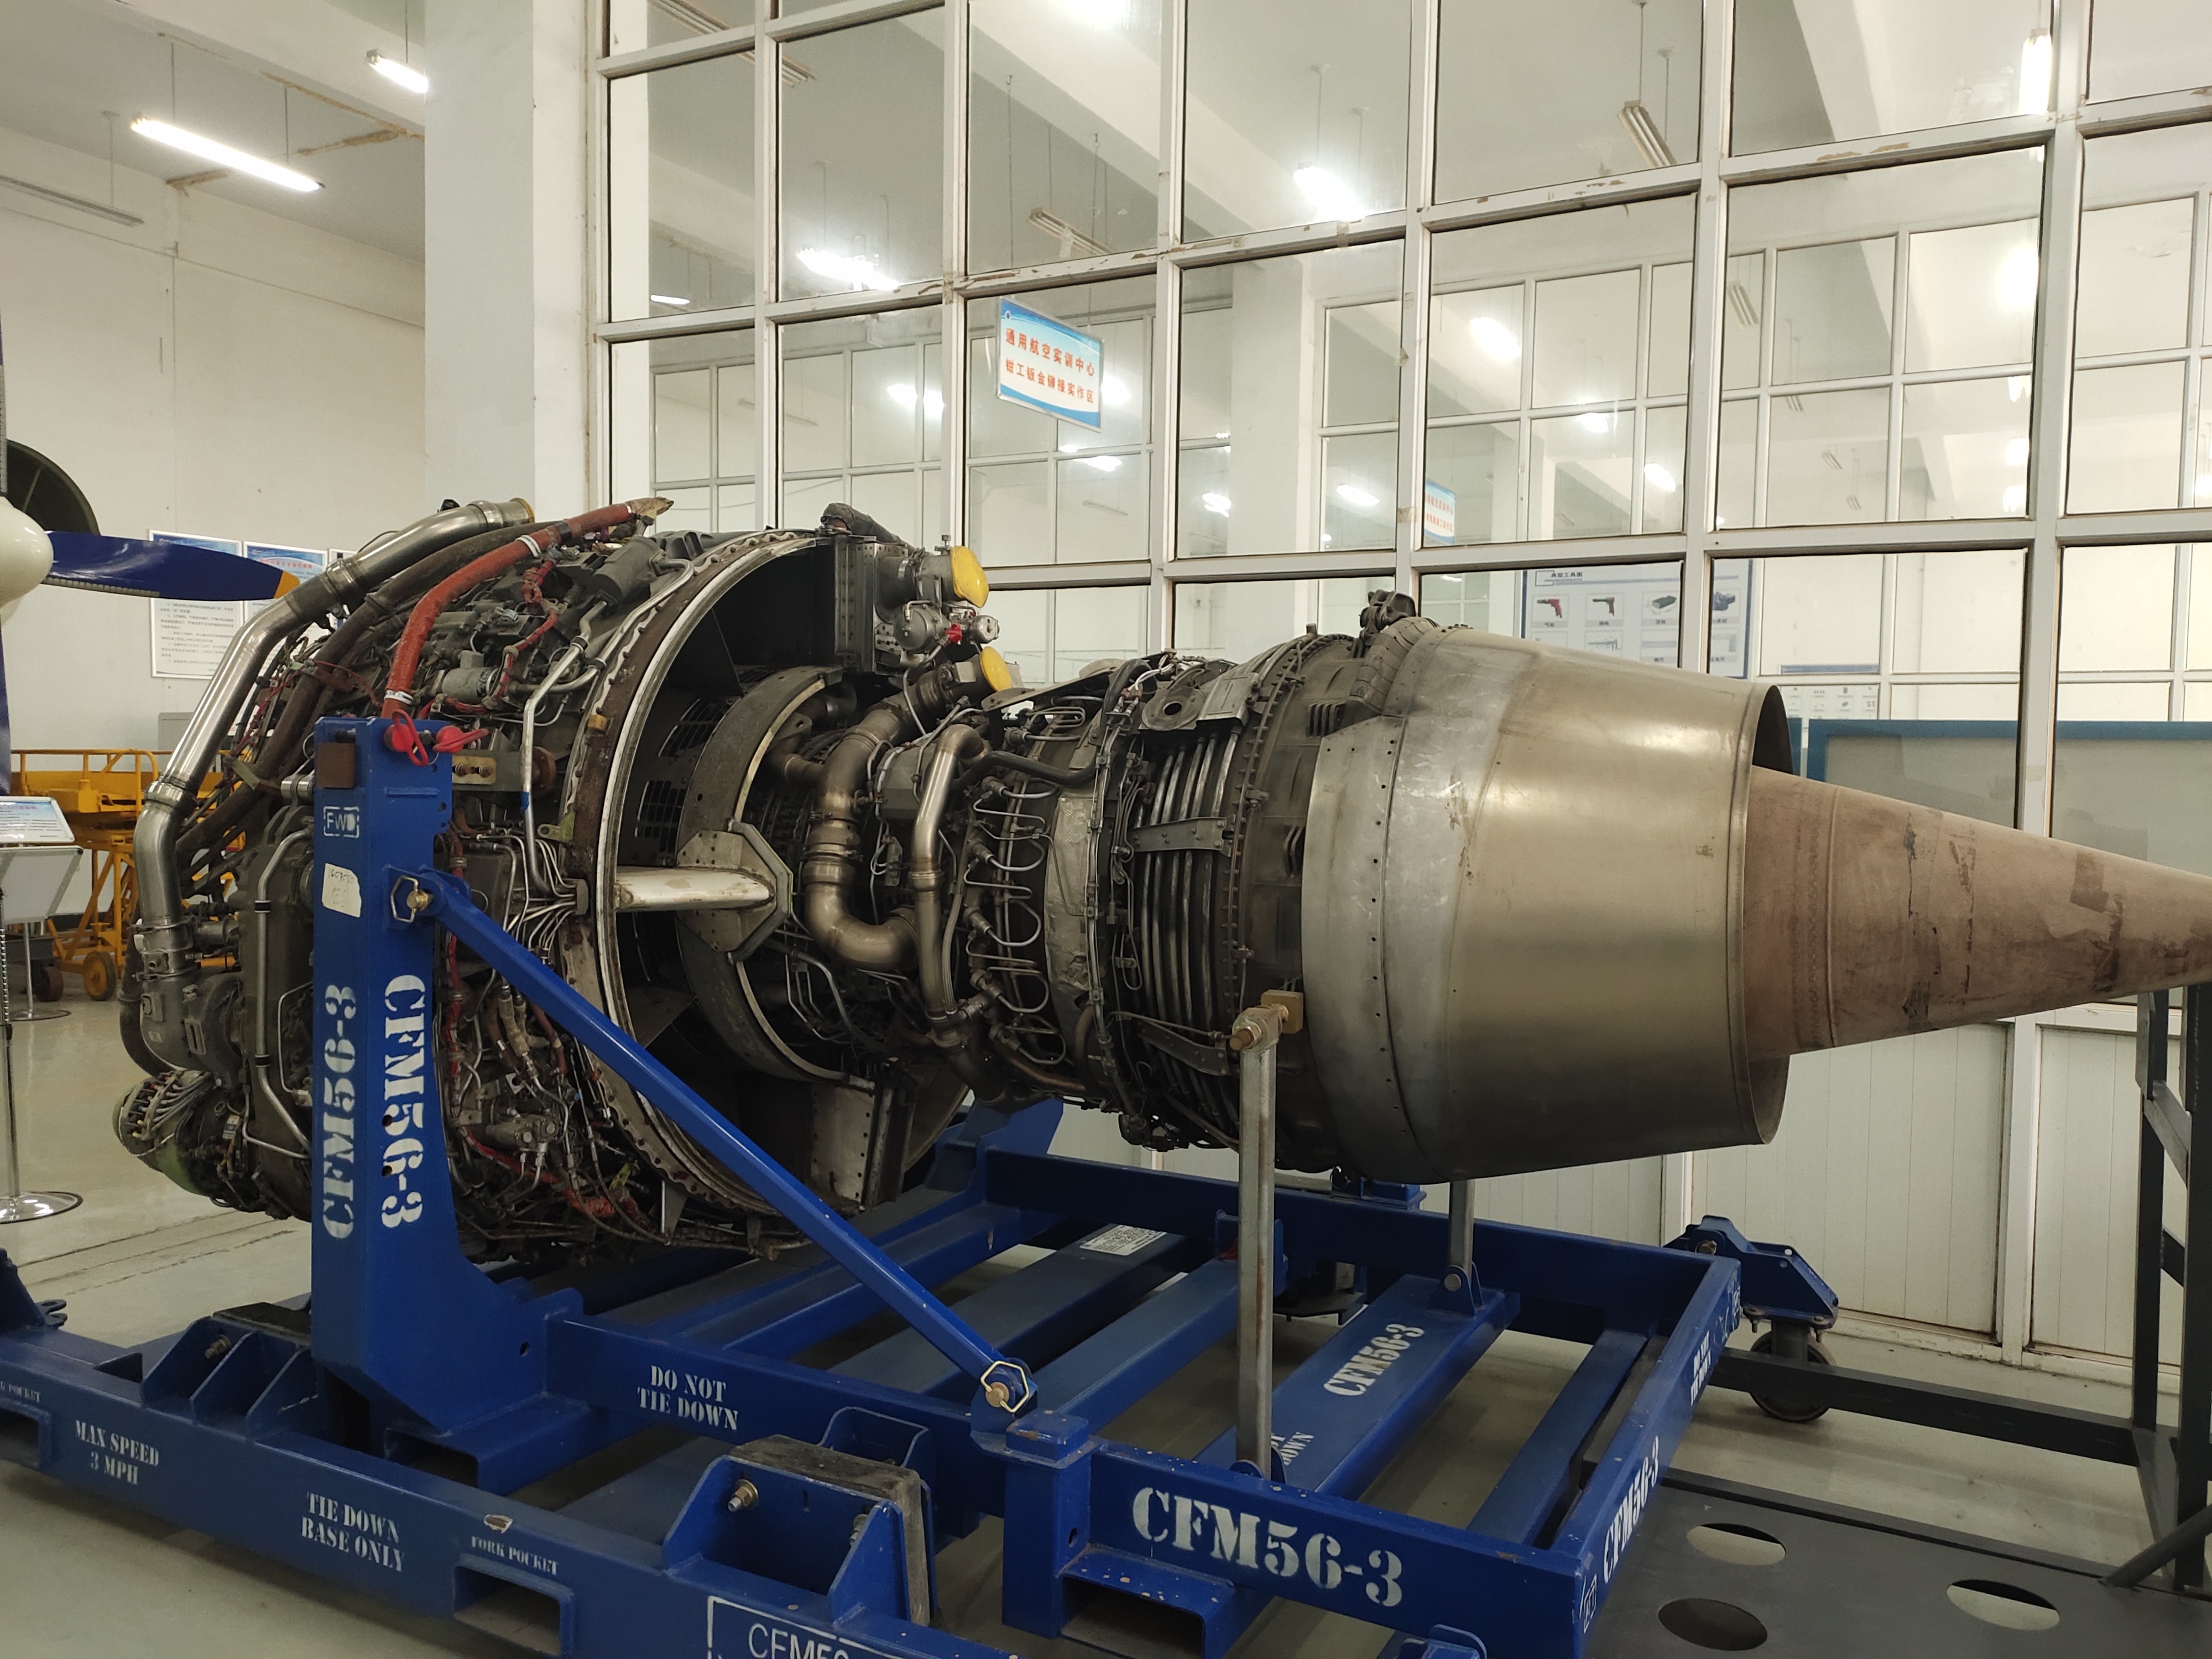 1x Engine of boeing 737-300 for sale